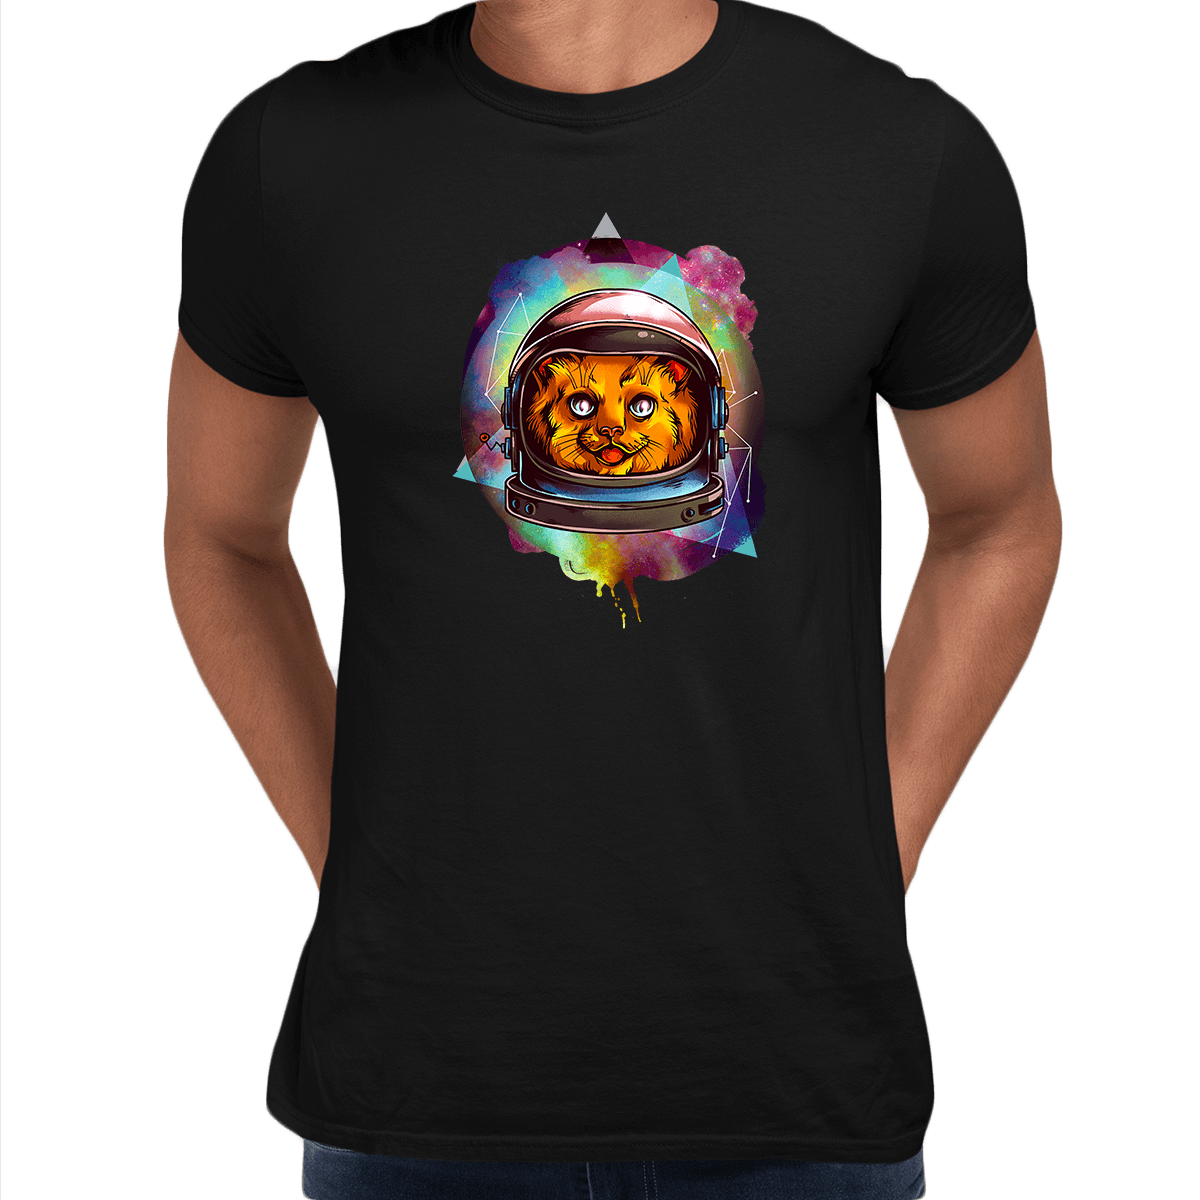 Awesome Cosmic Kitty T-Shirts with an Attitude - Kuzi Tees